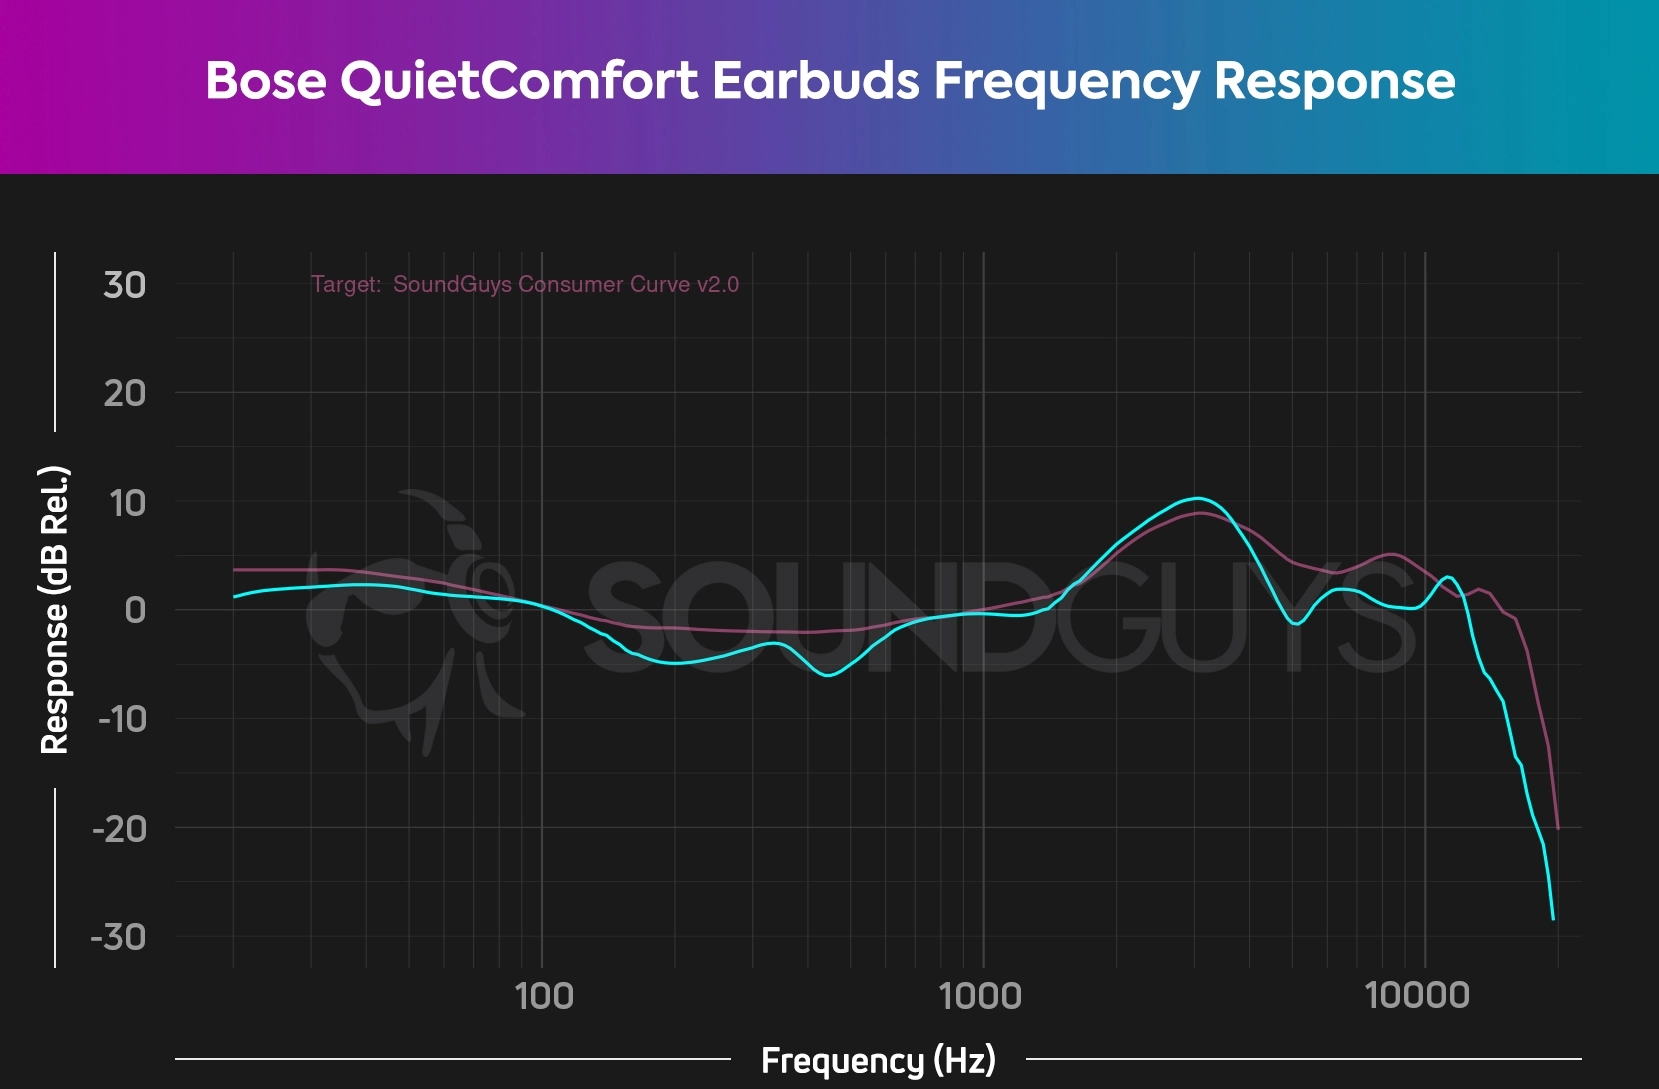 A chart depicts the Bose QuietComfort Earbuds (cyan) frequency response against the SoundGuys Consumer Curve V2.0 (pink), revealing Bose's very pleasing sound. To most listeners, the Bose QuietComfort Earbuds (cyan) will sound very, very good.